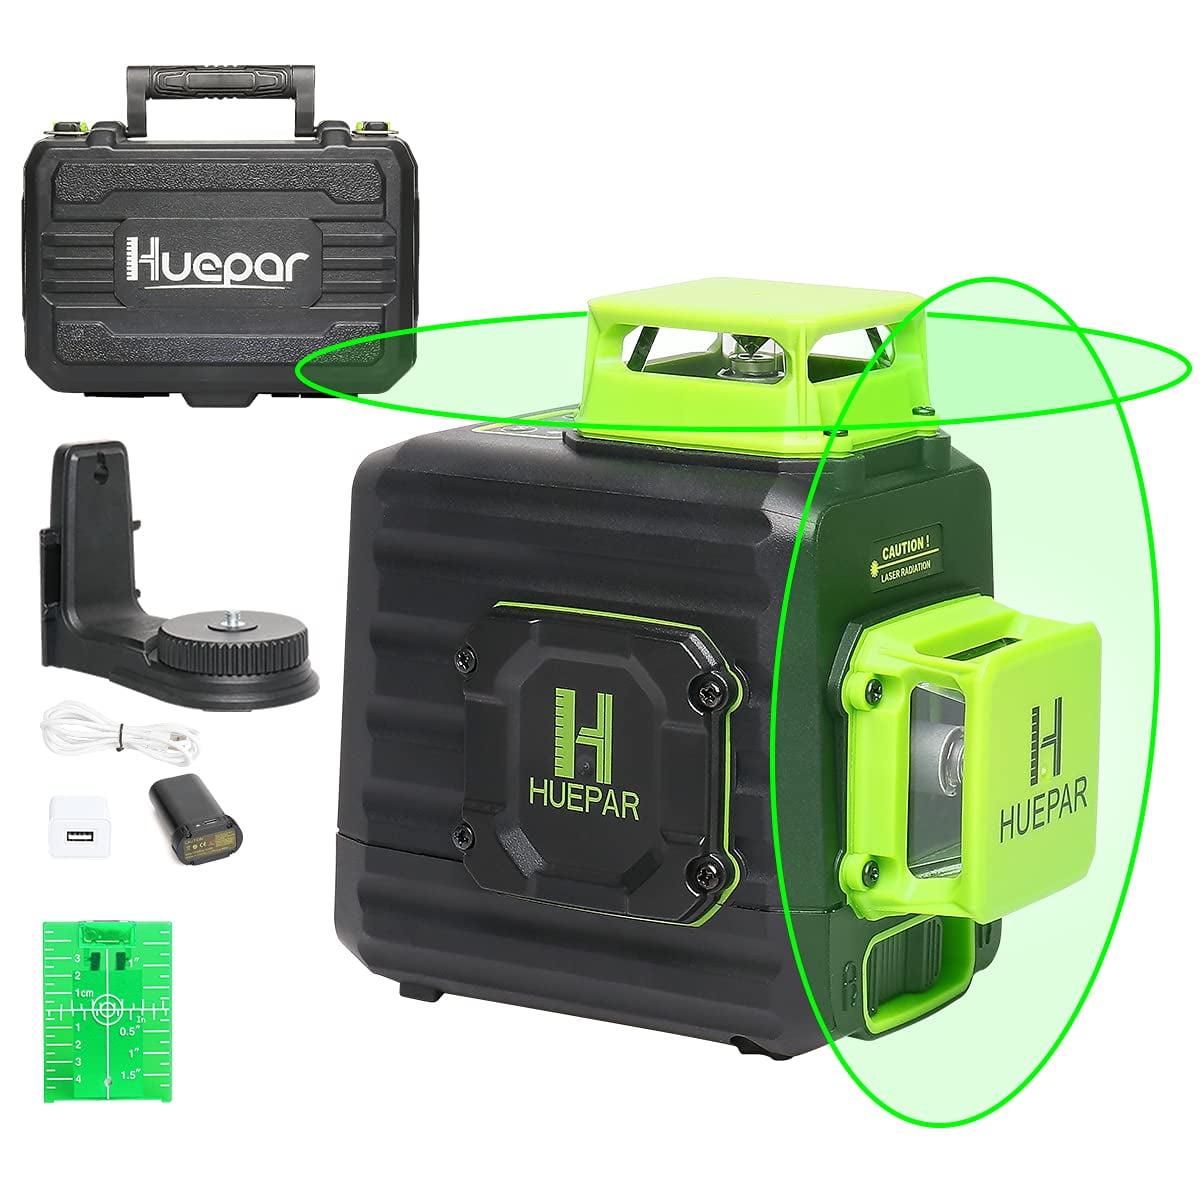 Huepar 3D Cross Line Self-leveling Laser Level, 3 x 360 Green Beam  Three-Plane Leveling and Alignment Laser Tool, Hard Carry Case Included -  B03CG Pro